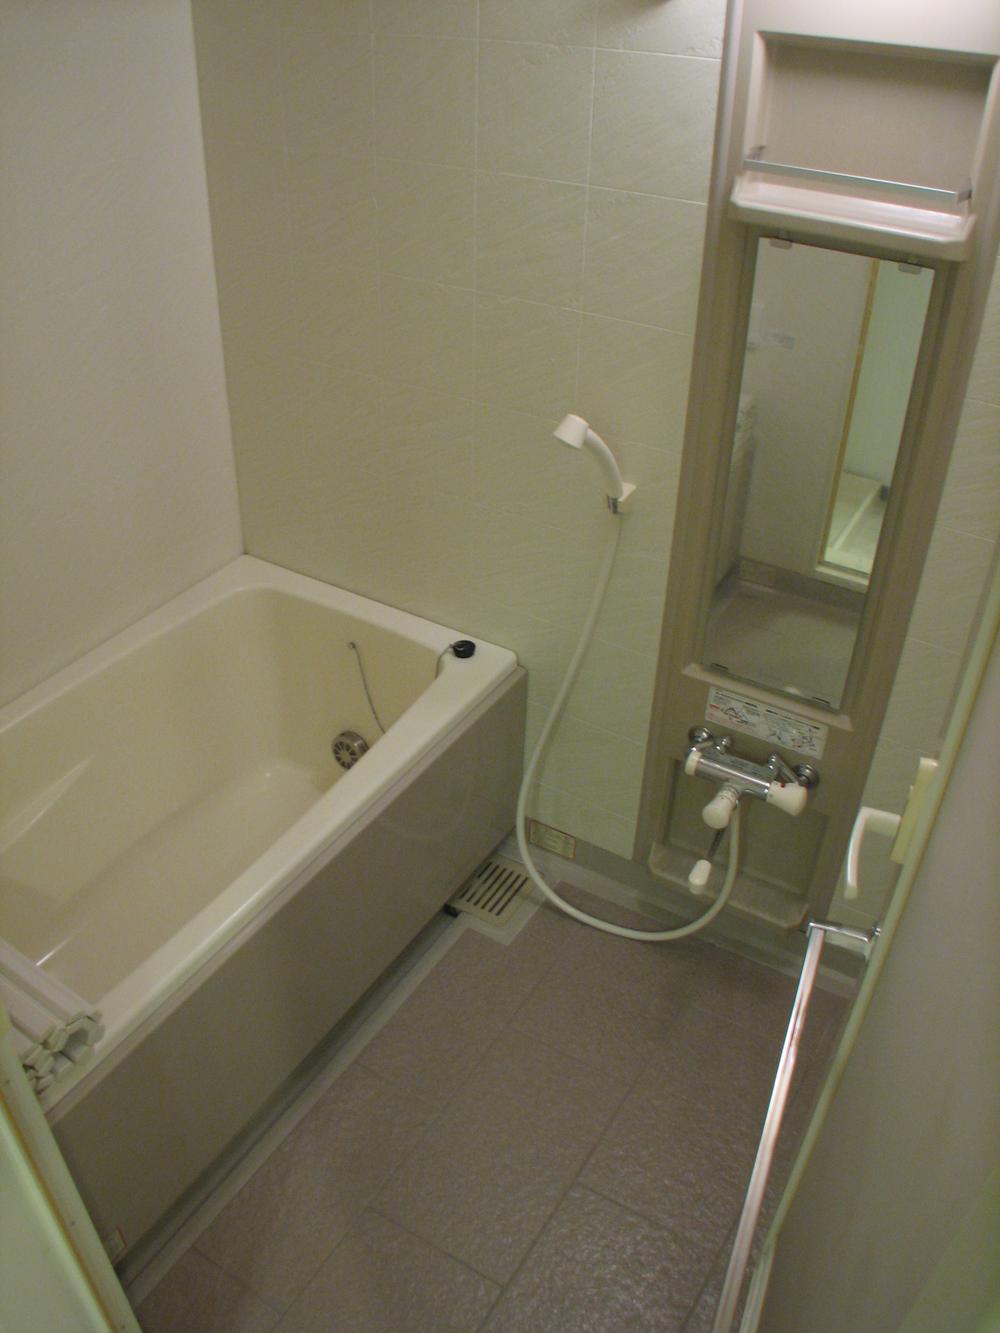 Other Equipment. Spacious bathtub that can stretch the legs